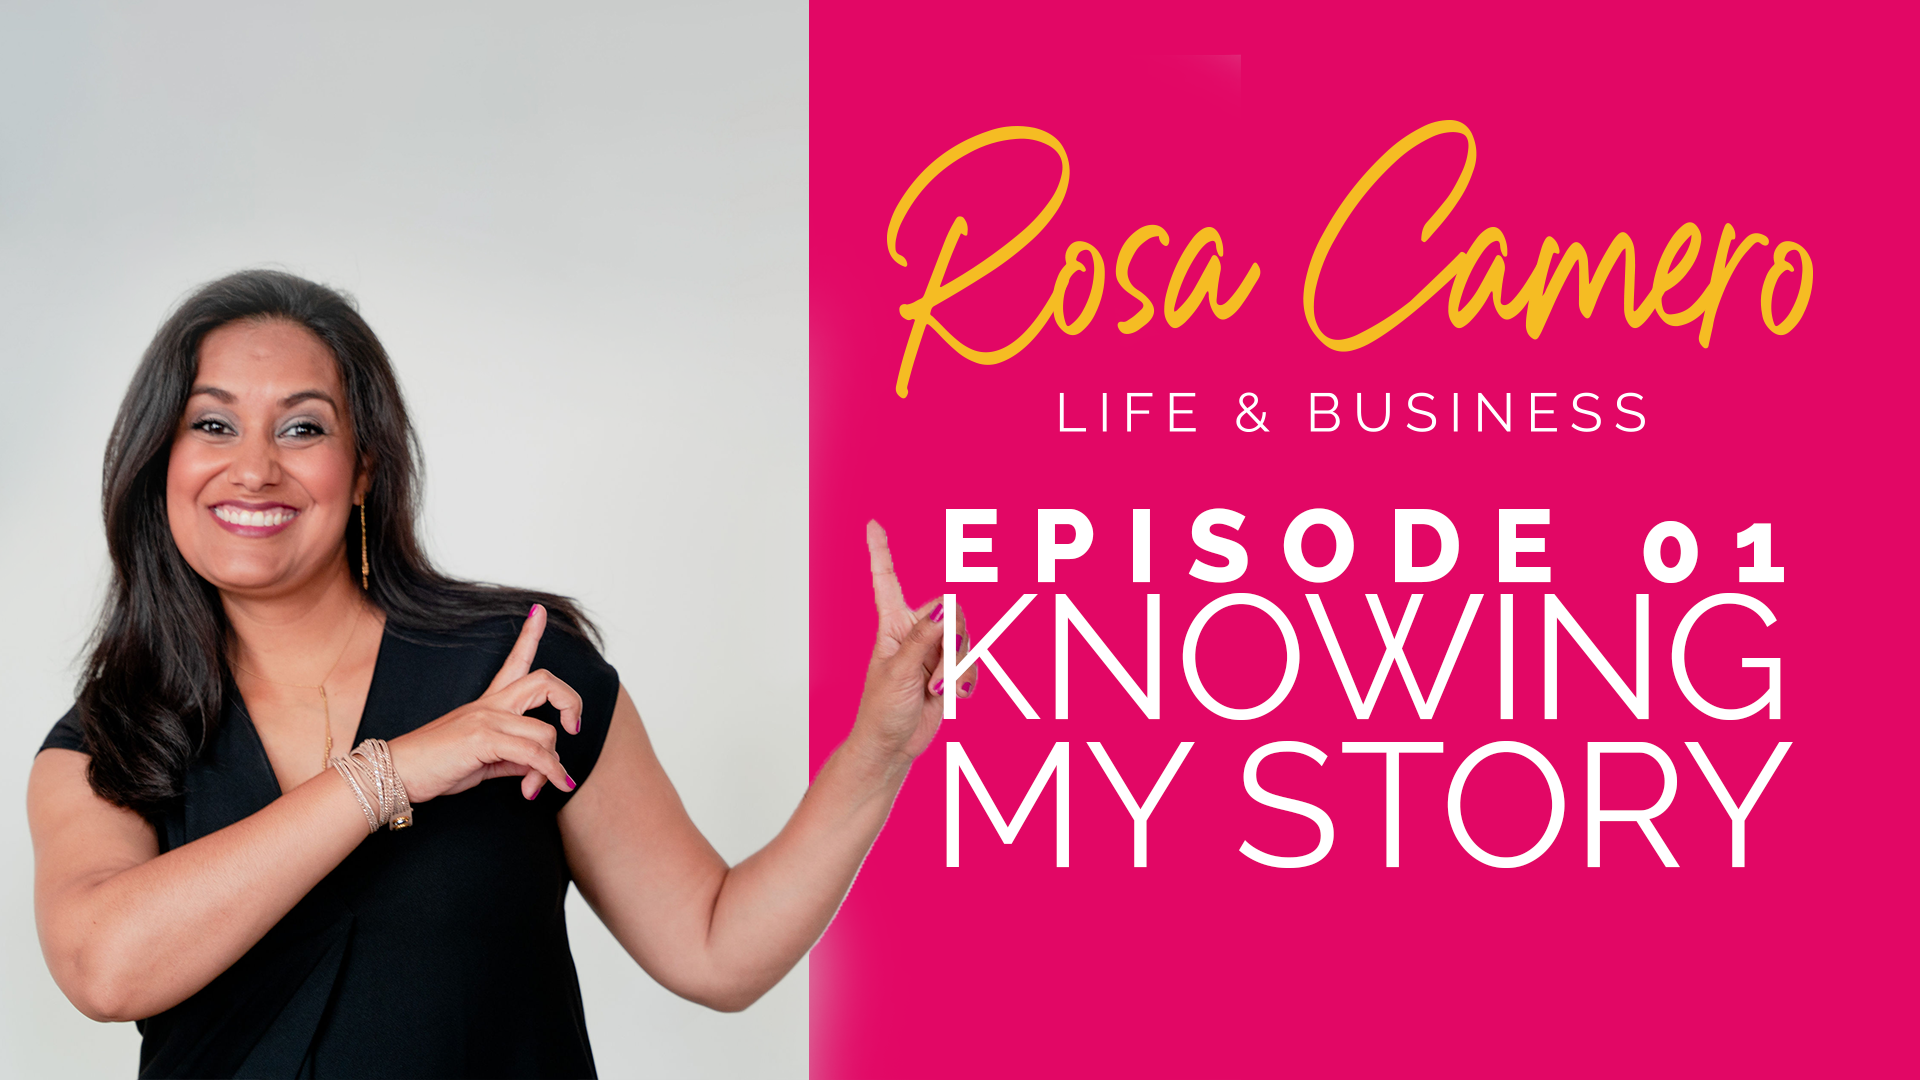 Life & Business Podcast Episode 1